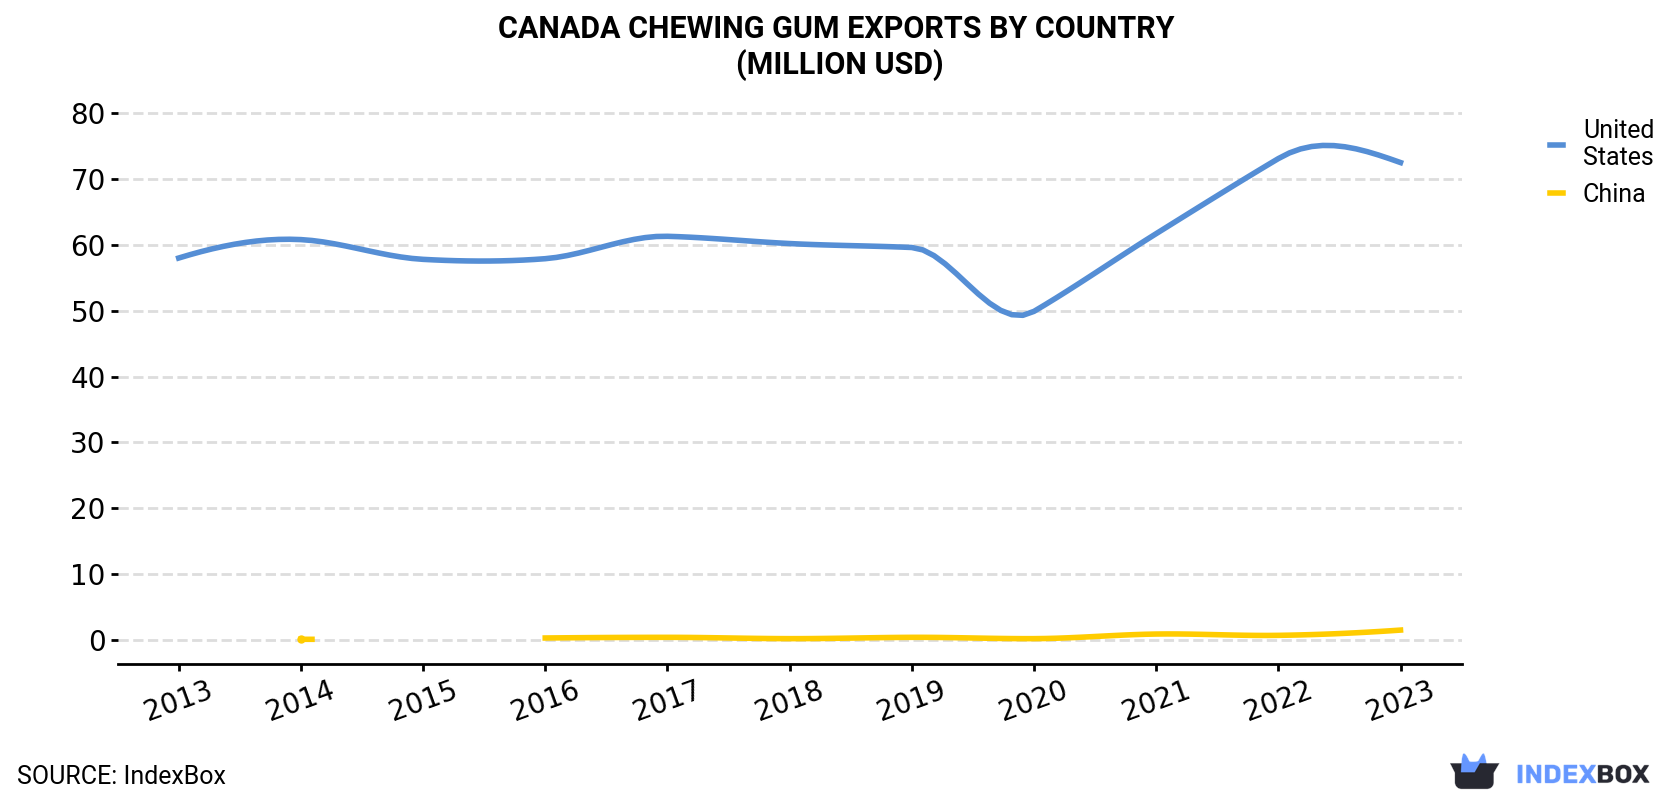 Canada Chewing Gum Exports By Country (Million USD)